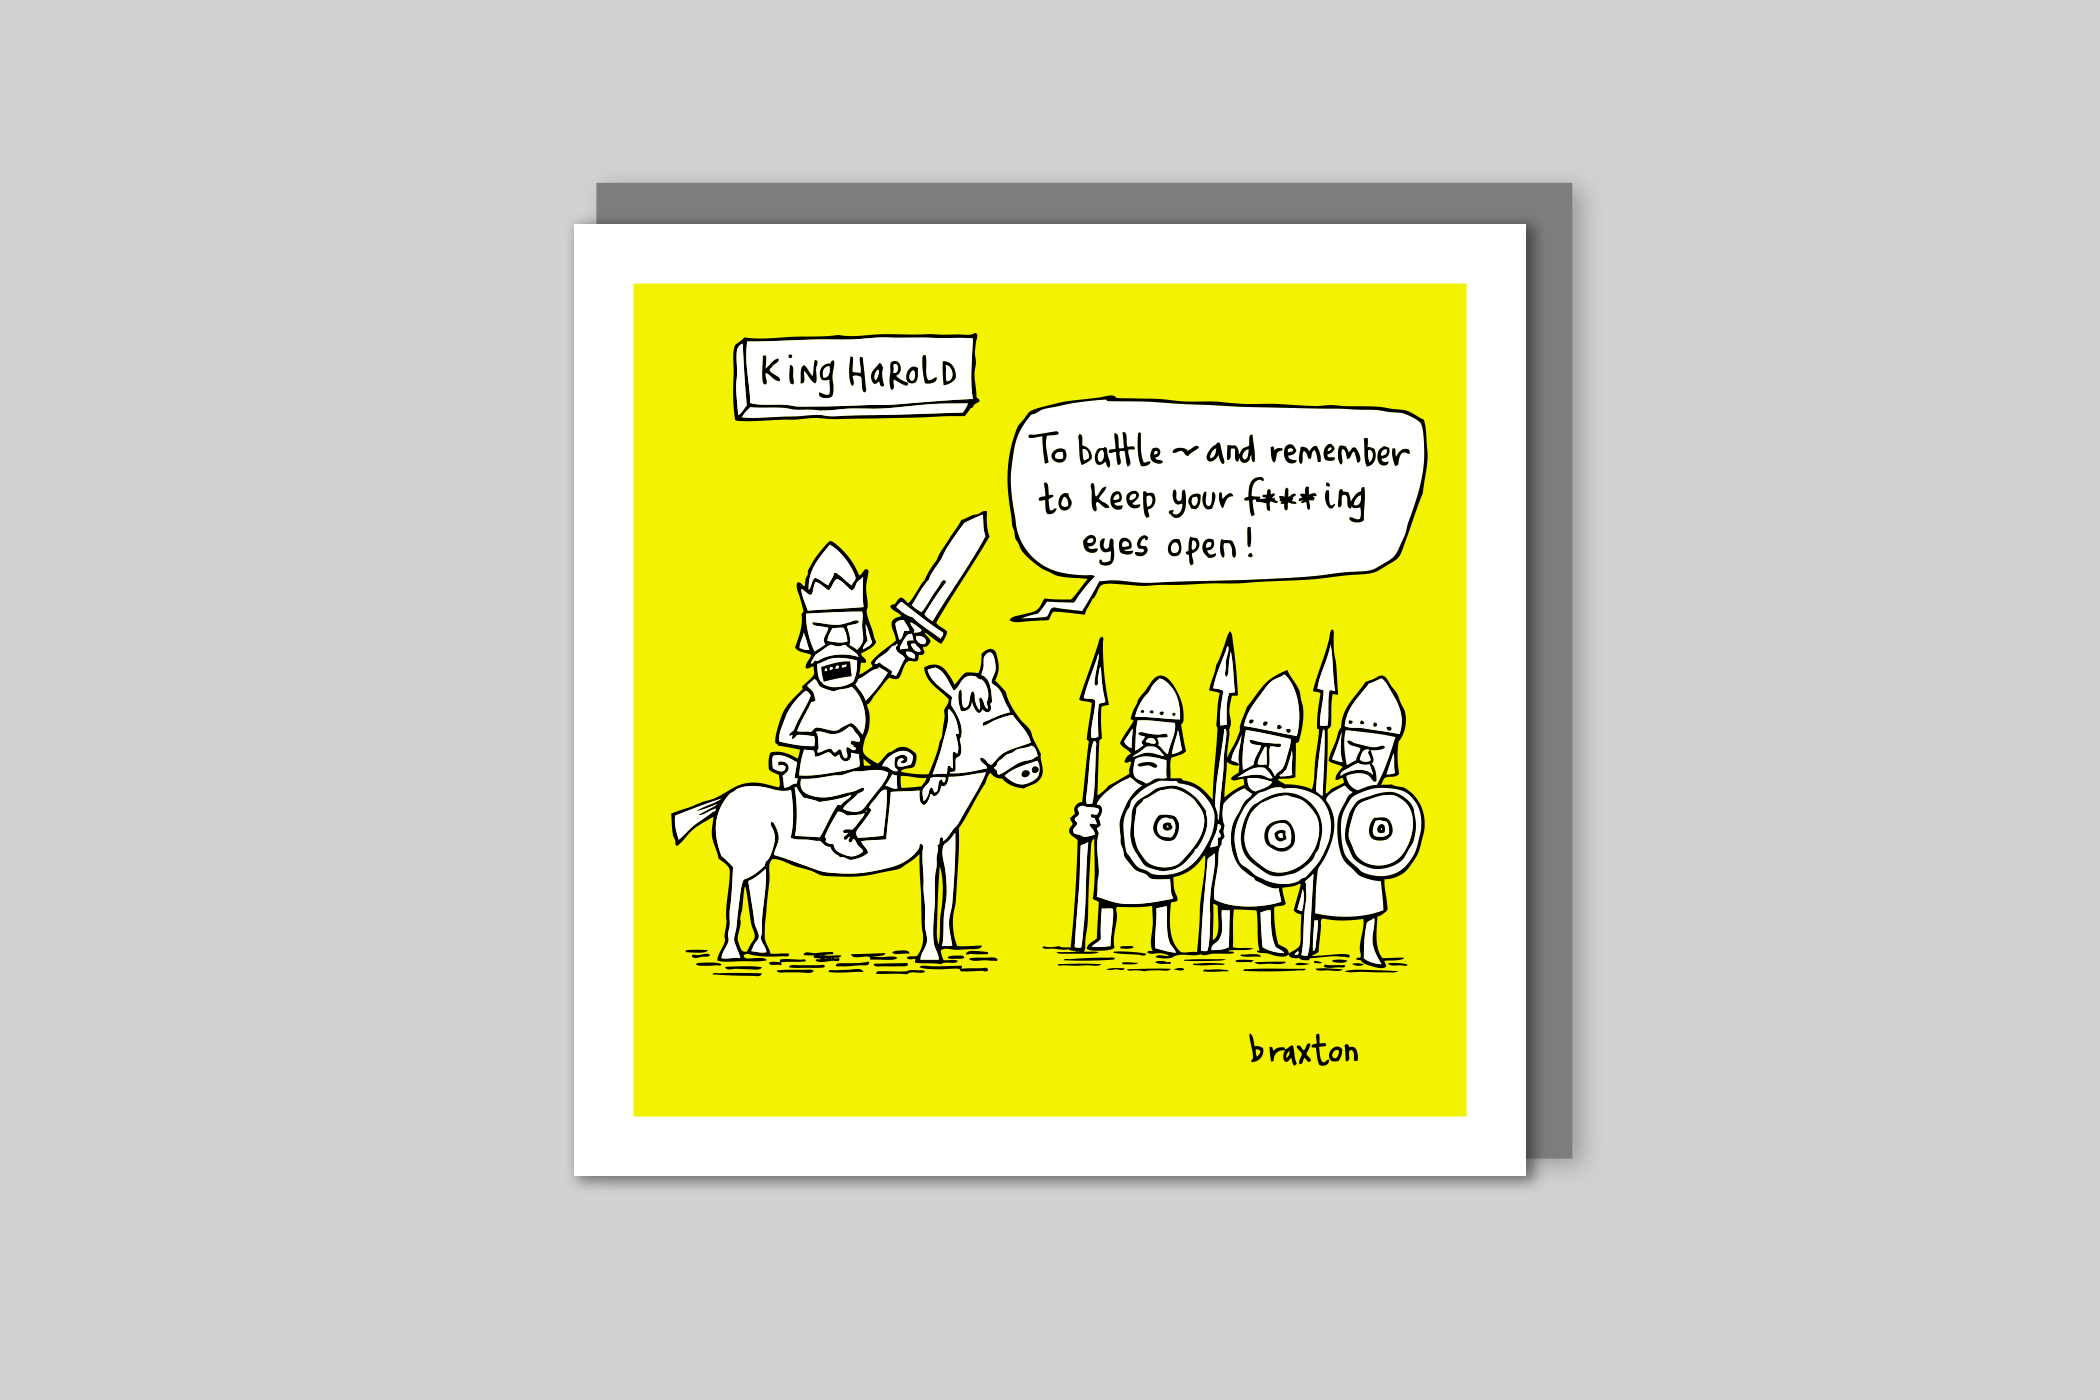 King Harold humorous illustration from History of the World range of greeting cards by Icon, back page.